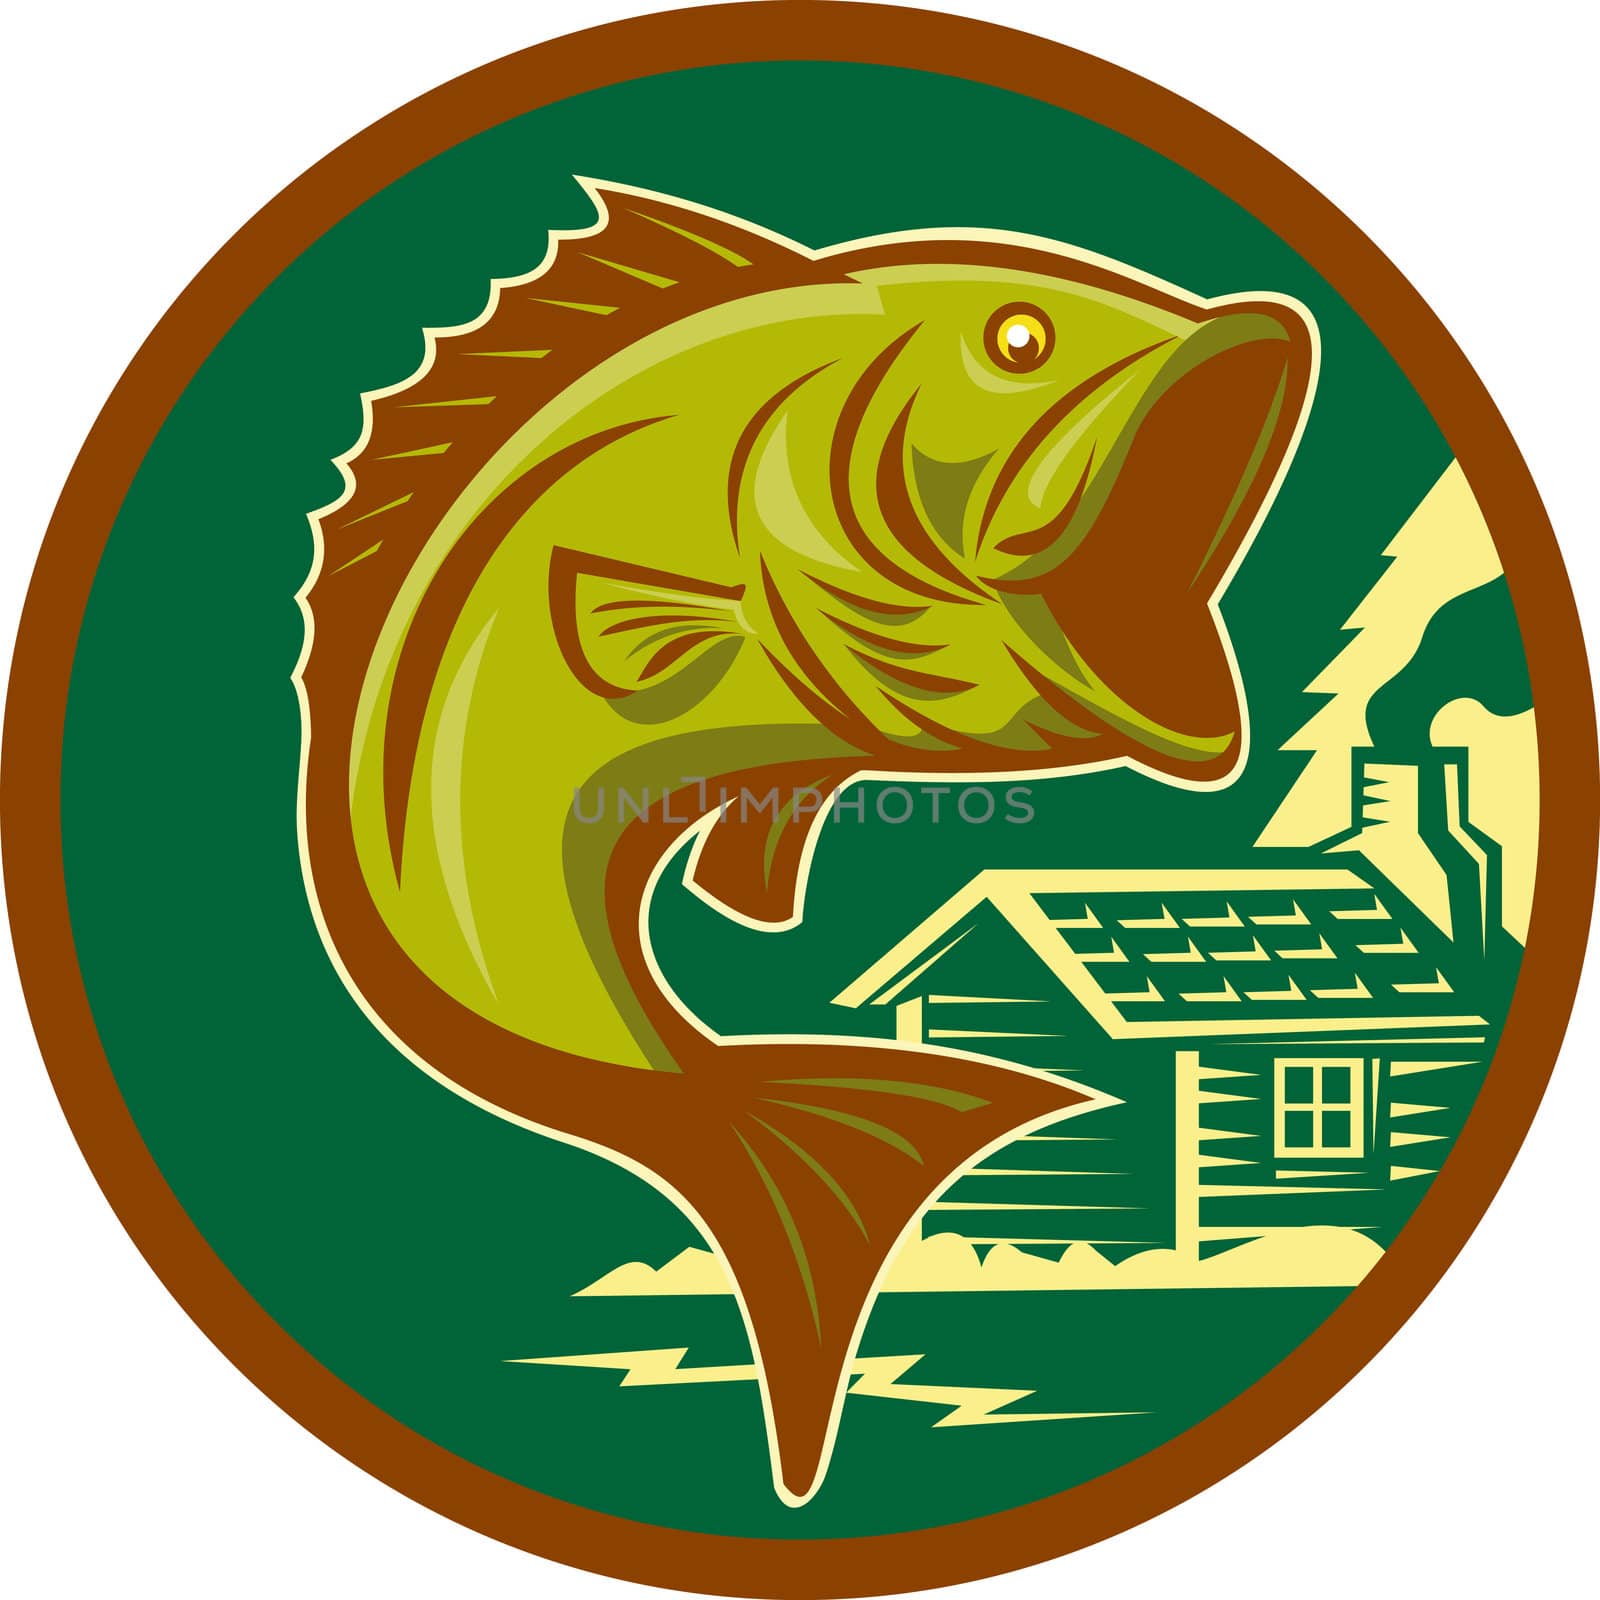 illustration of a largemouth bass fish jumping set inside circle with log cabin in background background done in retro style